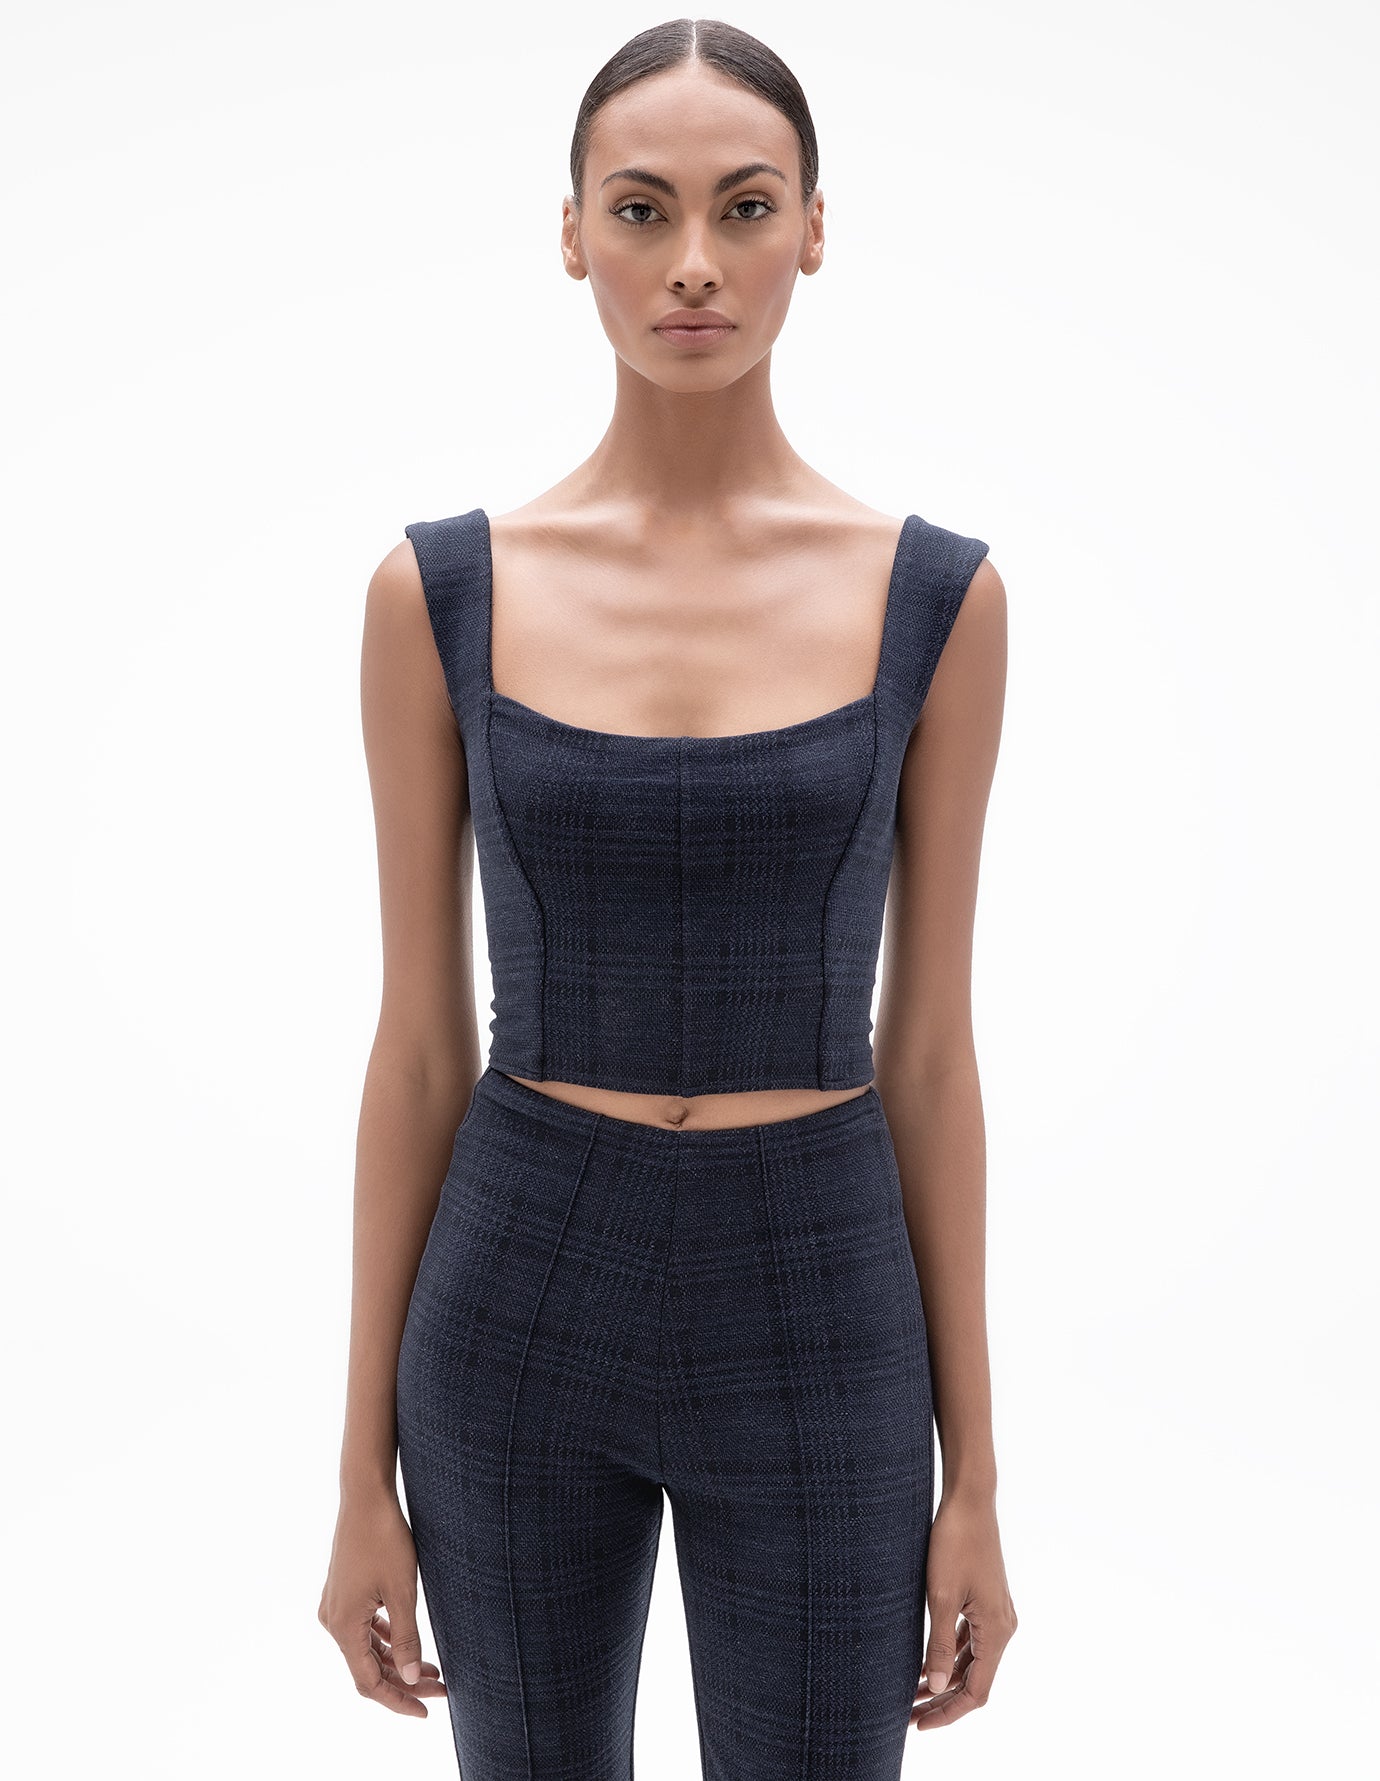 MADISON TOP ONA Chung IN – Yoon BUSTIER by NAVY